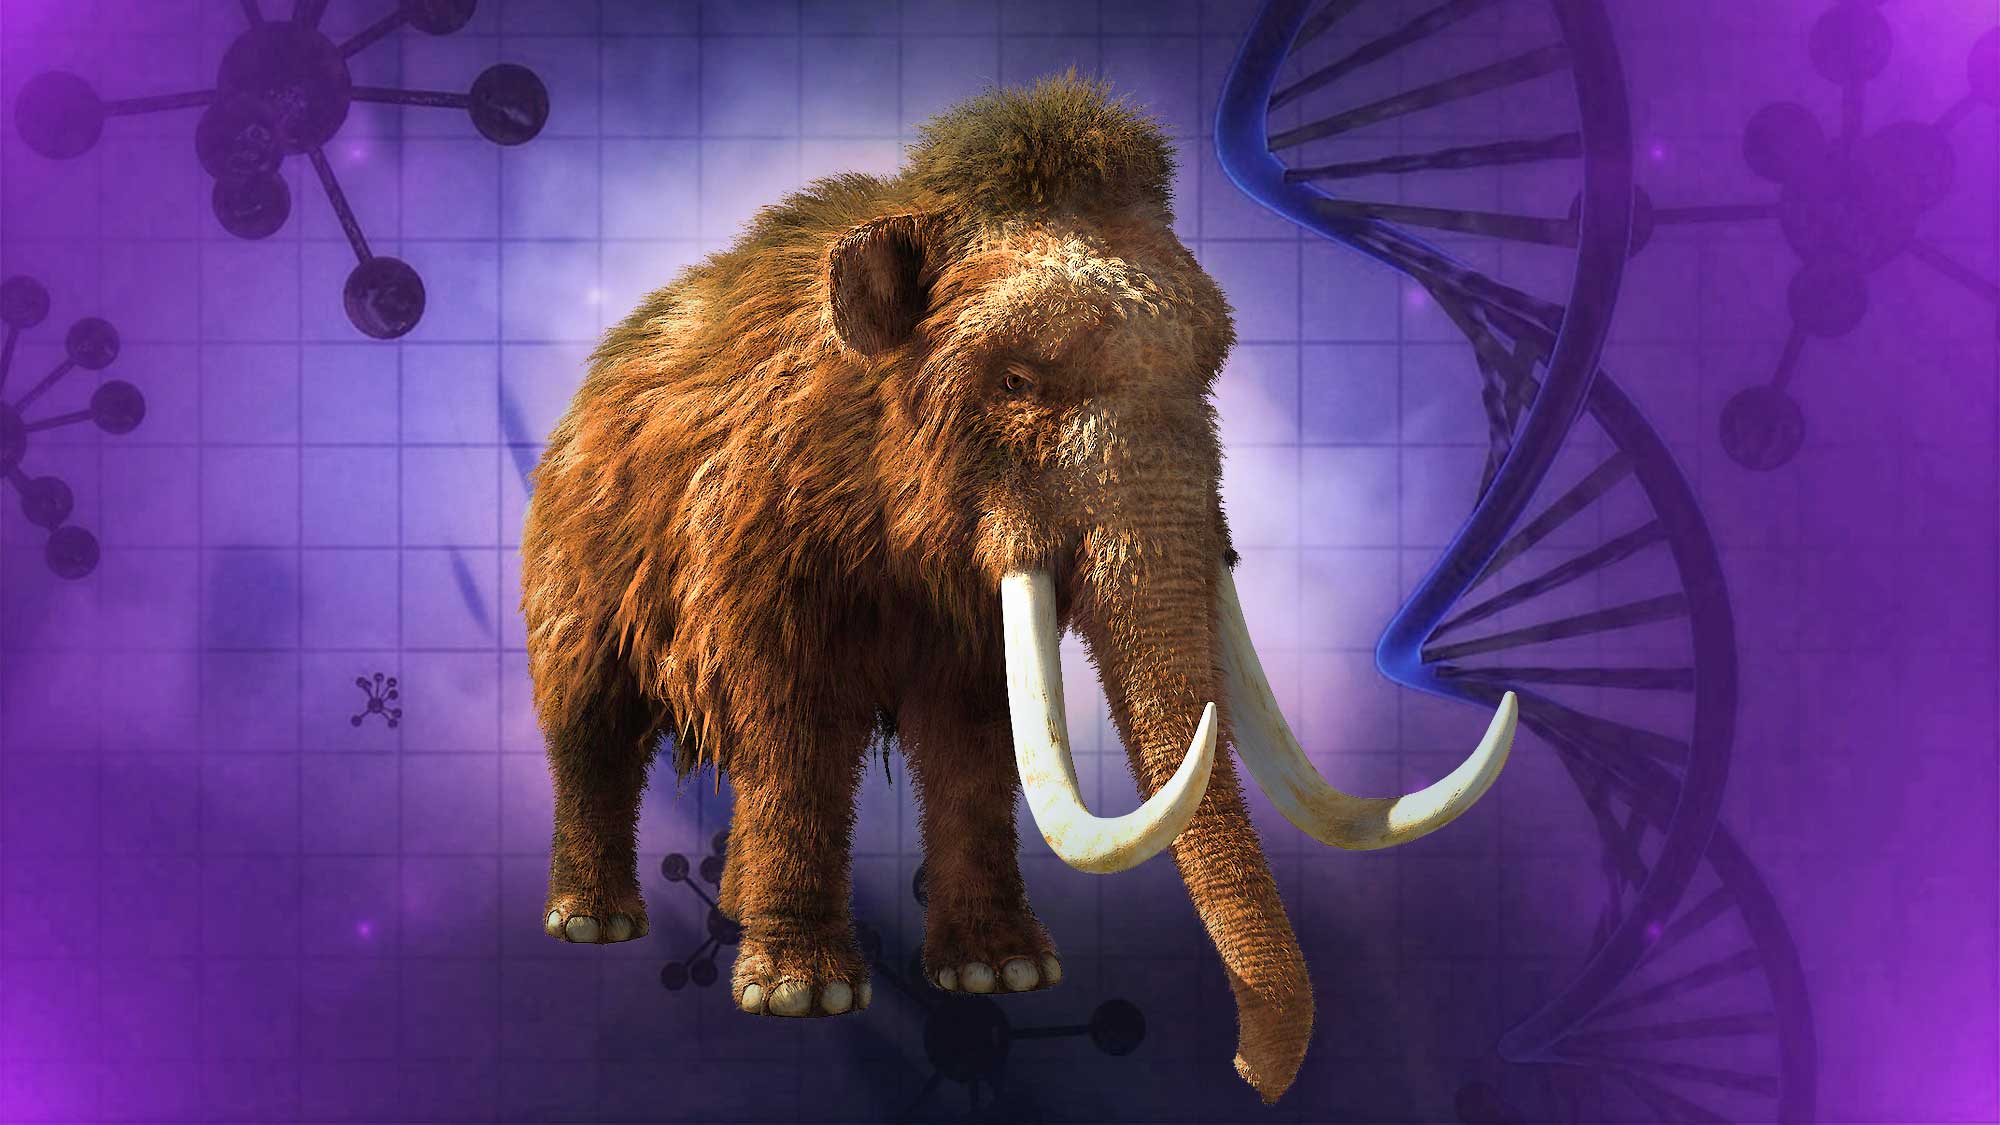 Bringing Back The Woolly Mammoth - Should Scientists Clone The Mammoth?